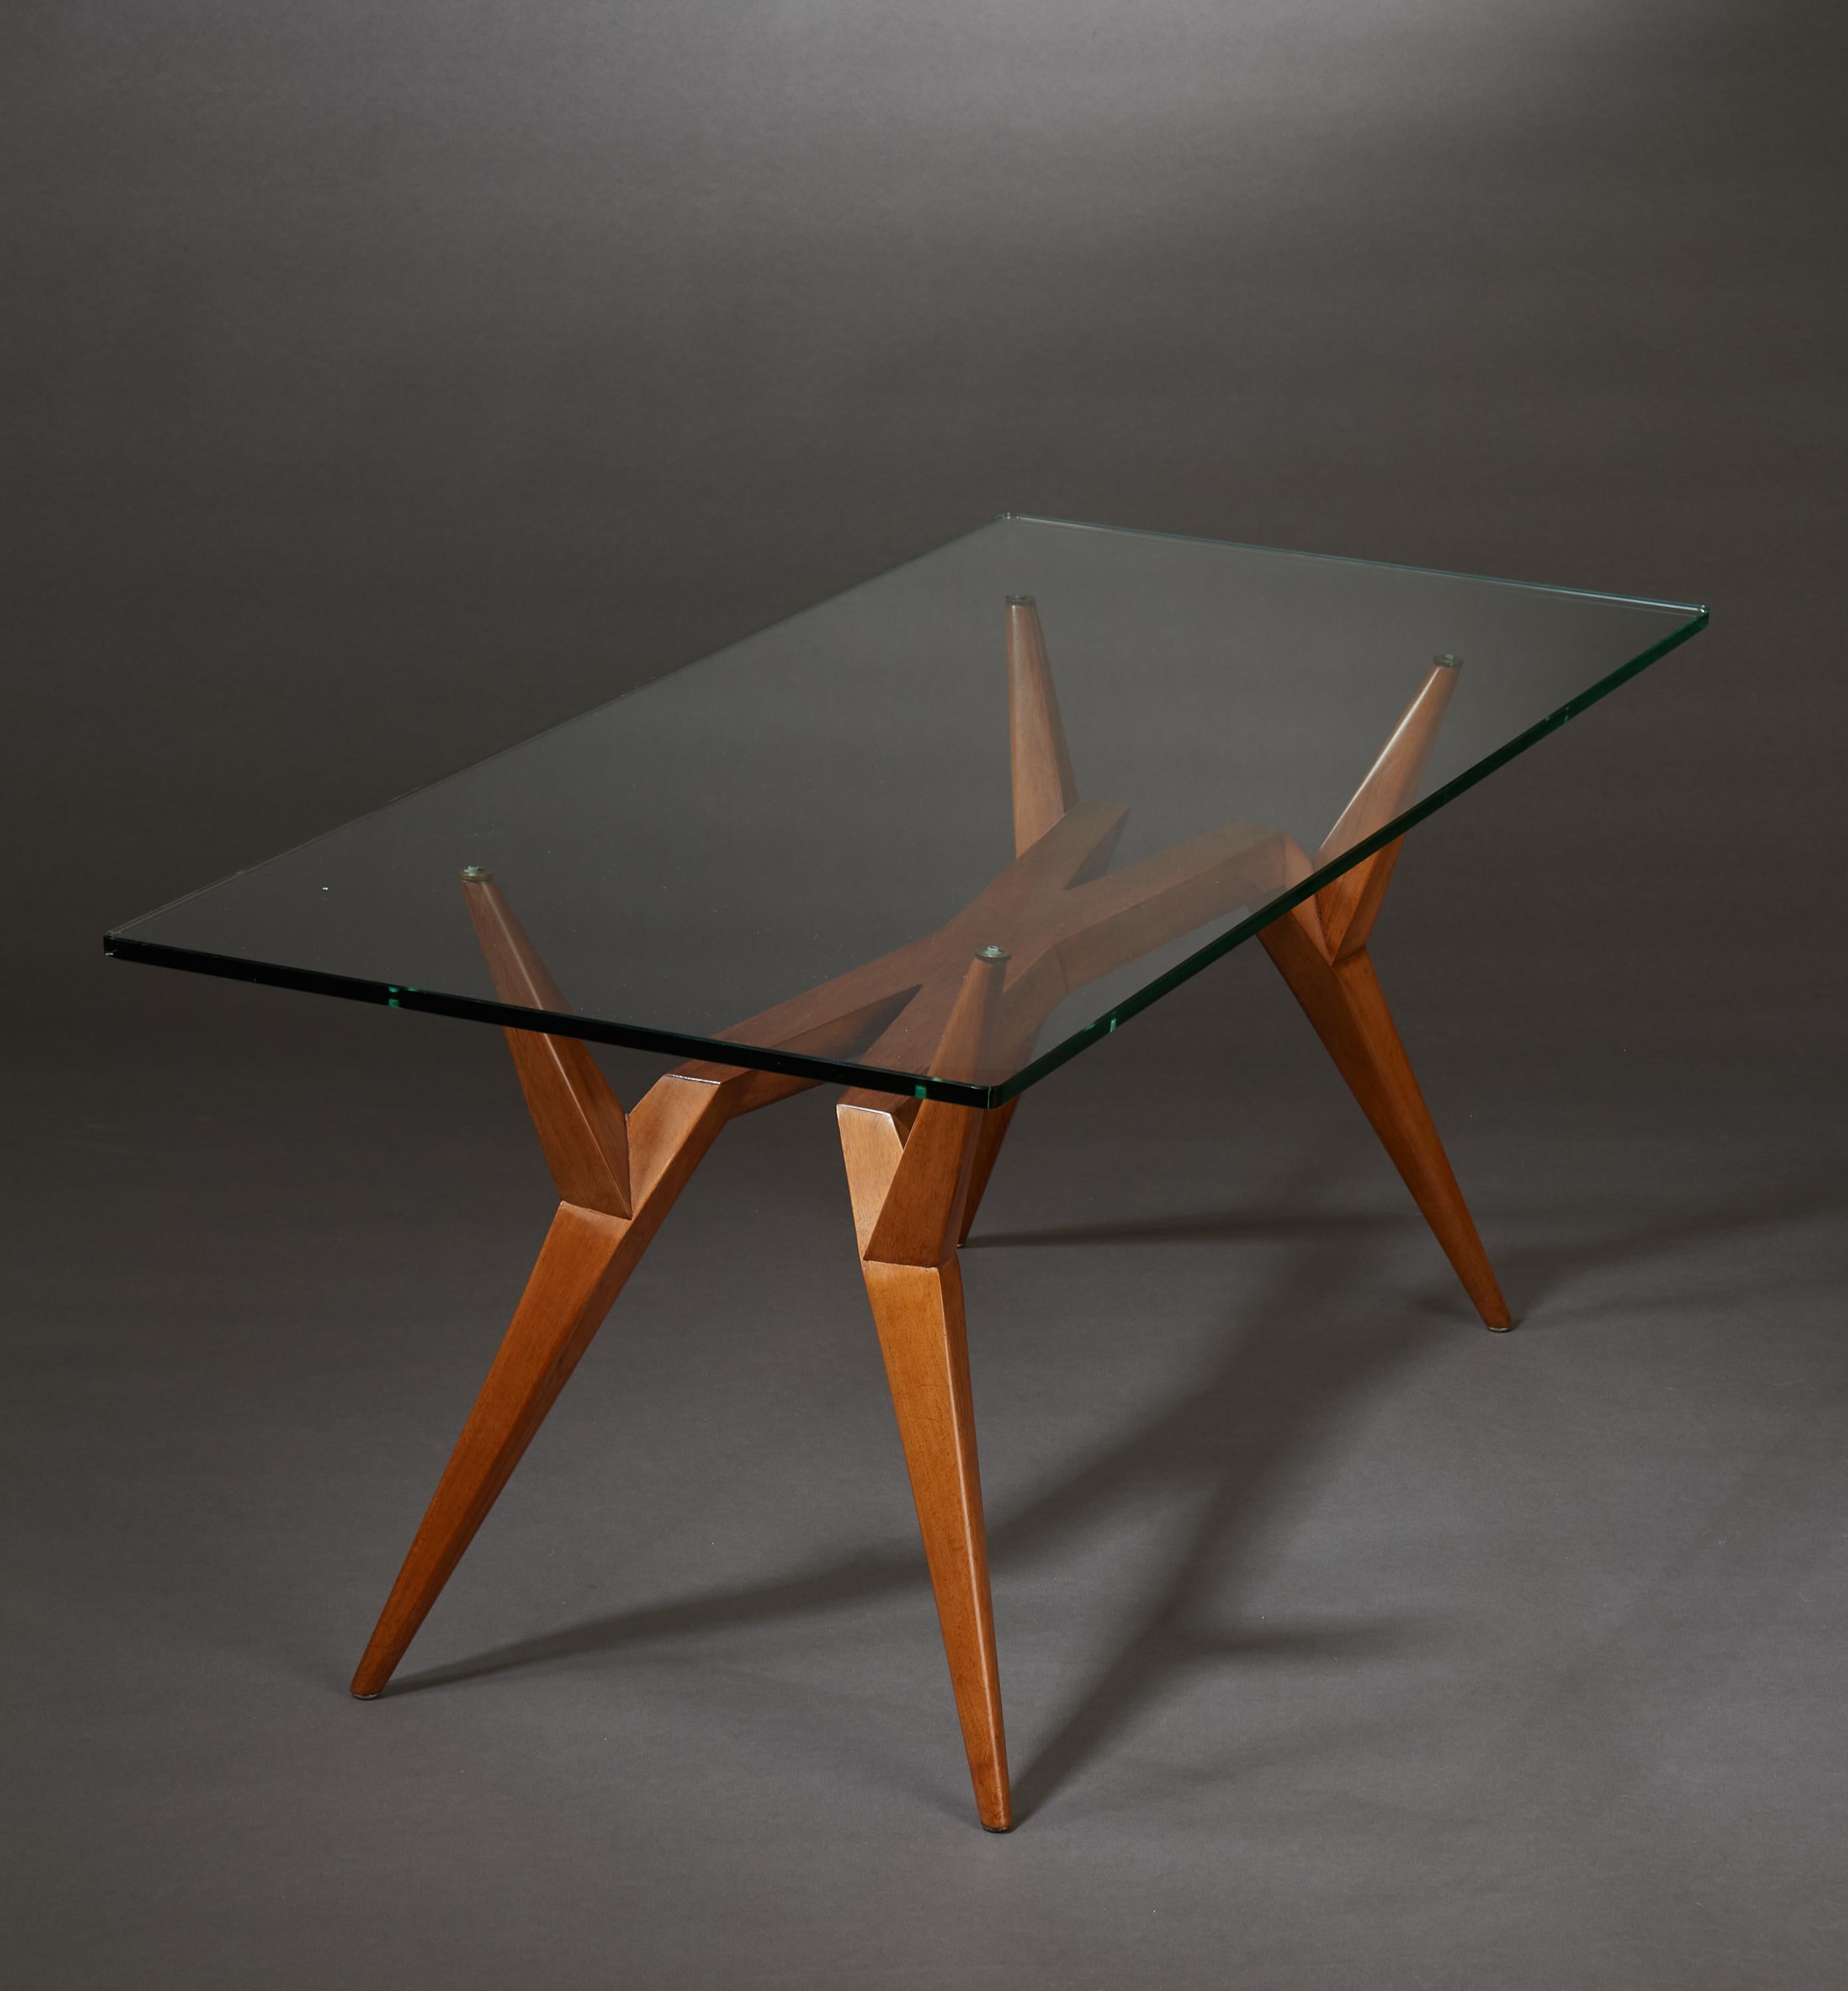 Pierluigi Giordani Rare Constructivist Coffee Table in Wood & Glass, Italy 1950s In Good Condition For Sale In New York, NY